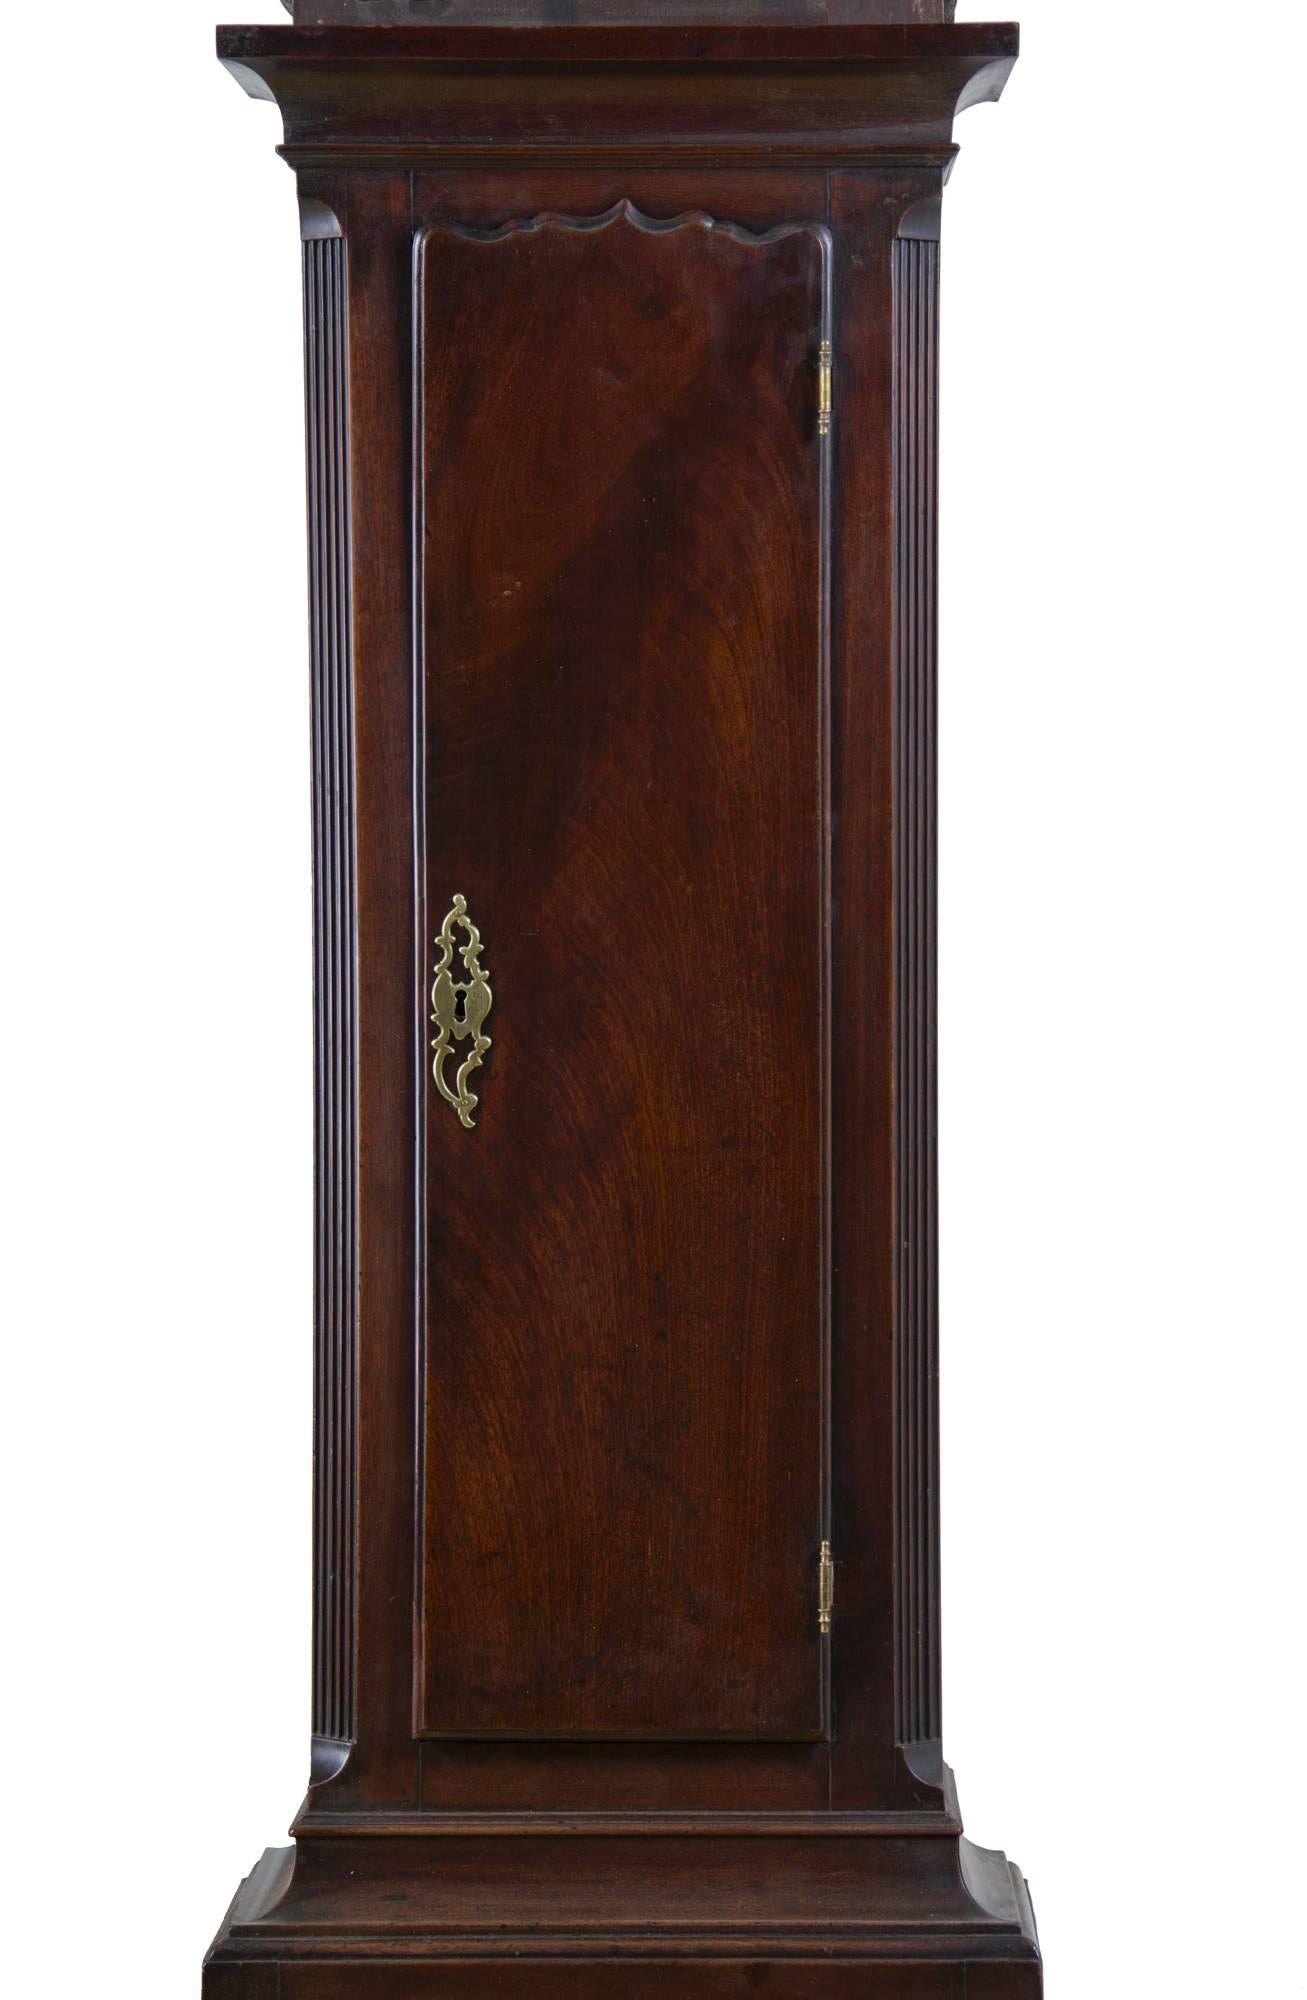 Mahogany Chippendale English Tall Case Clock with Tides, England, Thos. Pierce For Sale 1